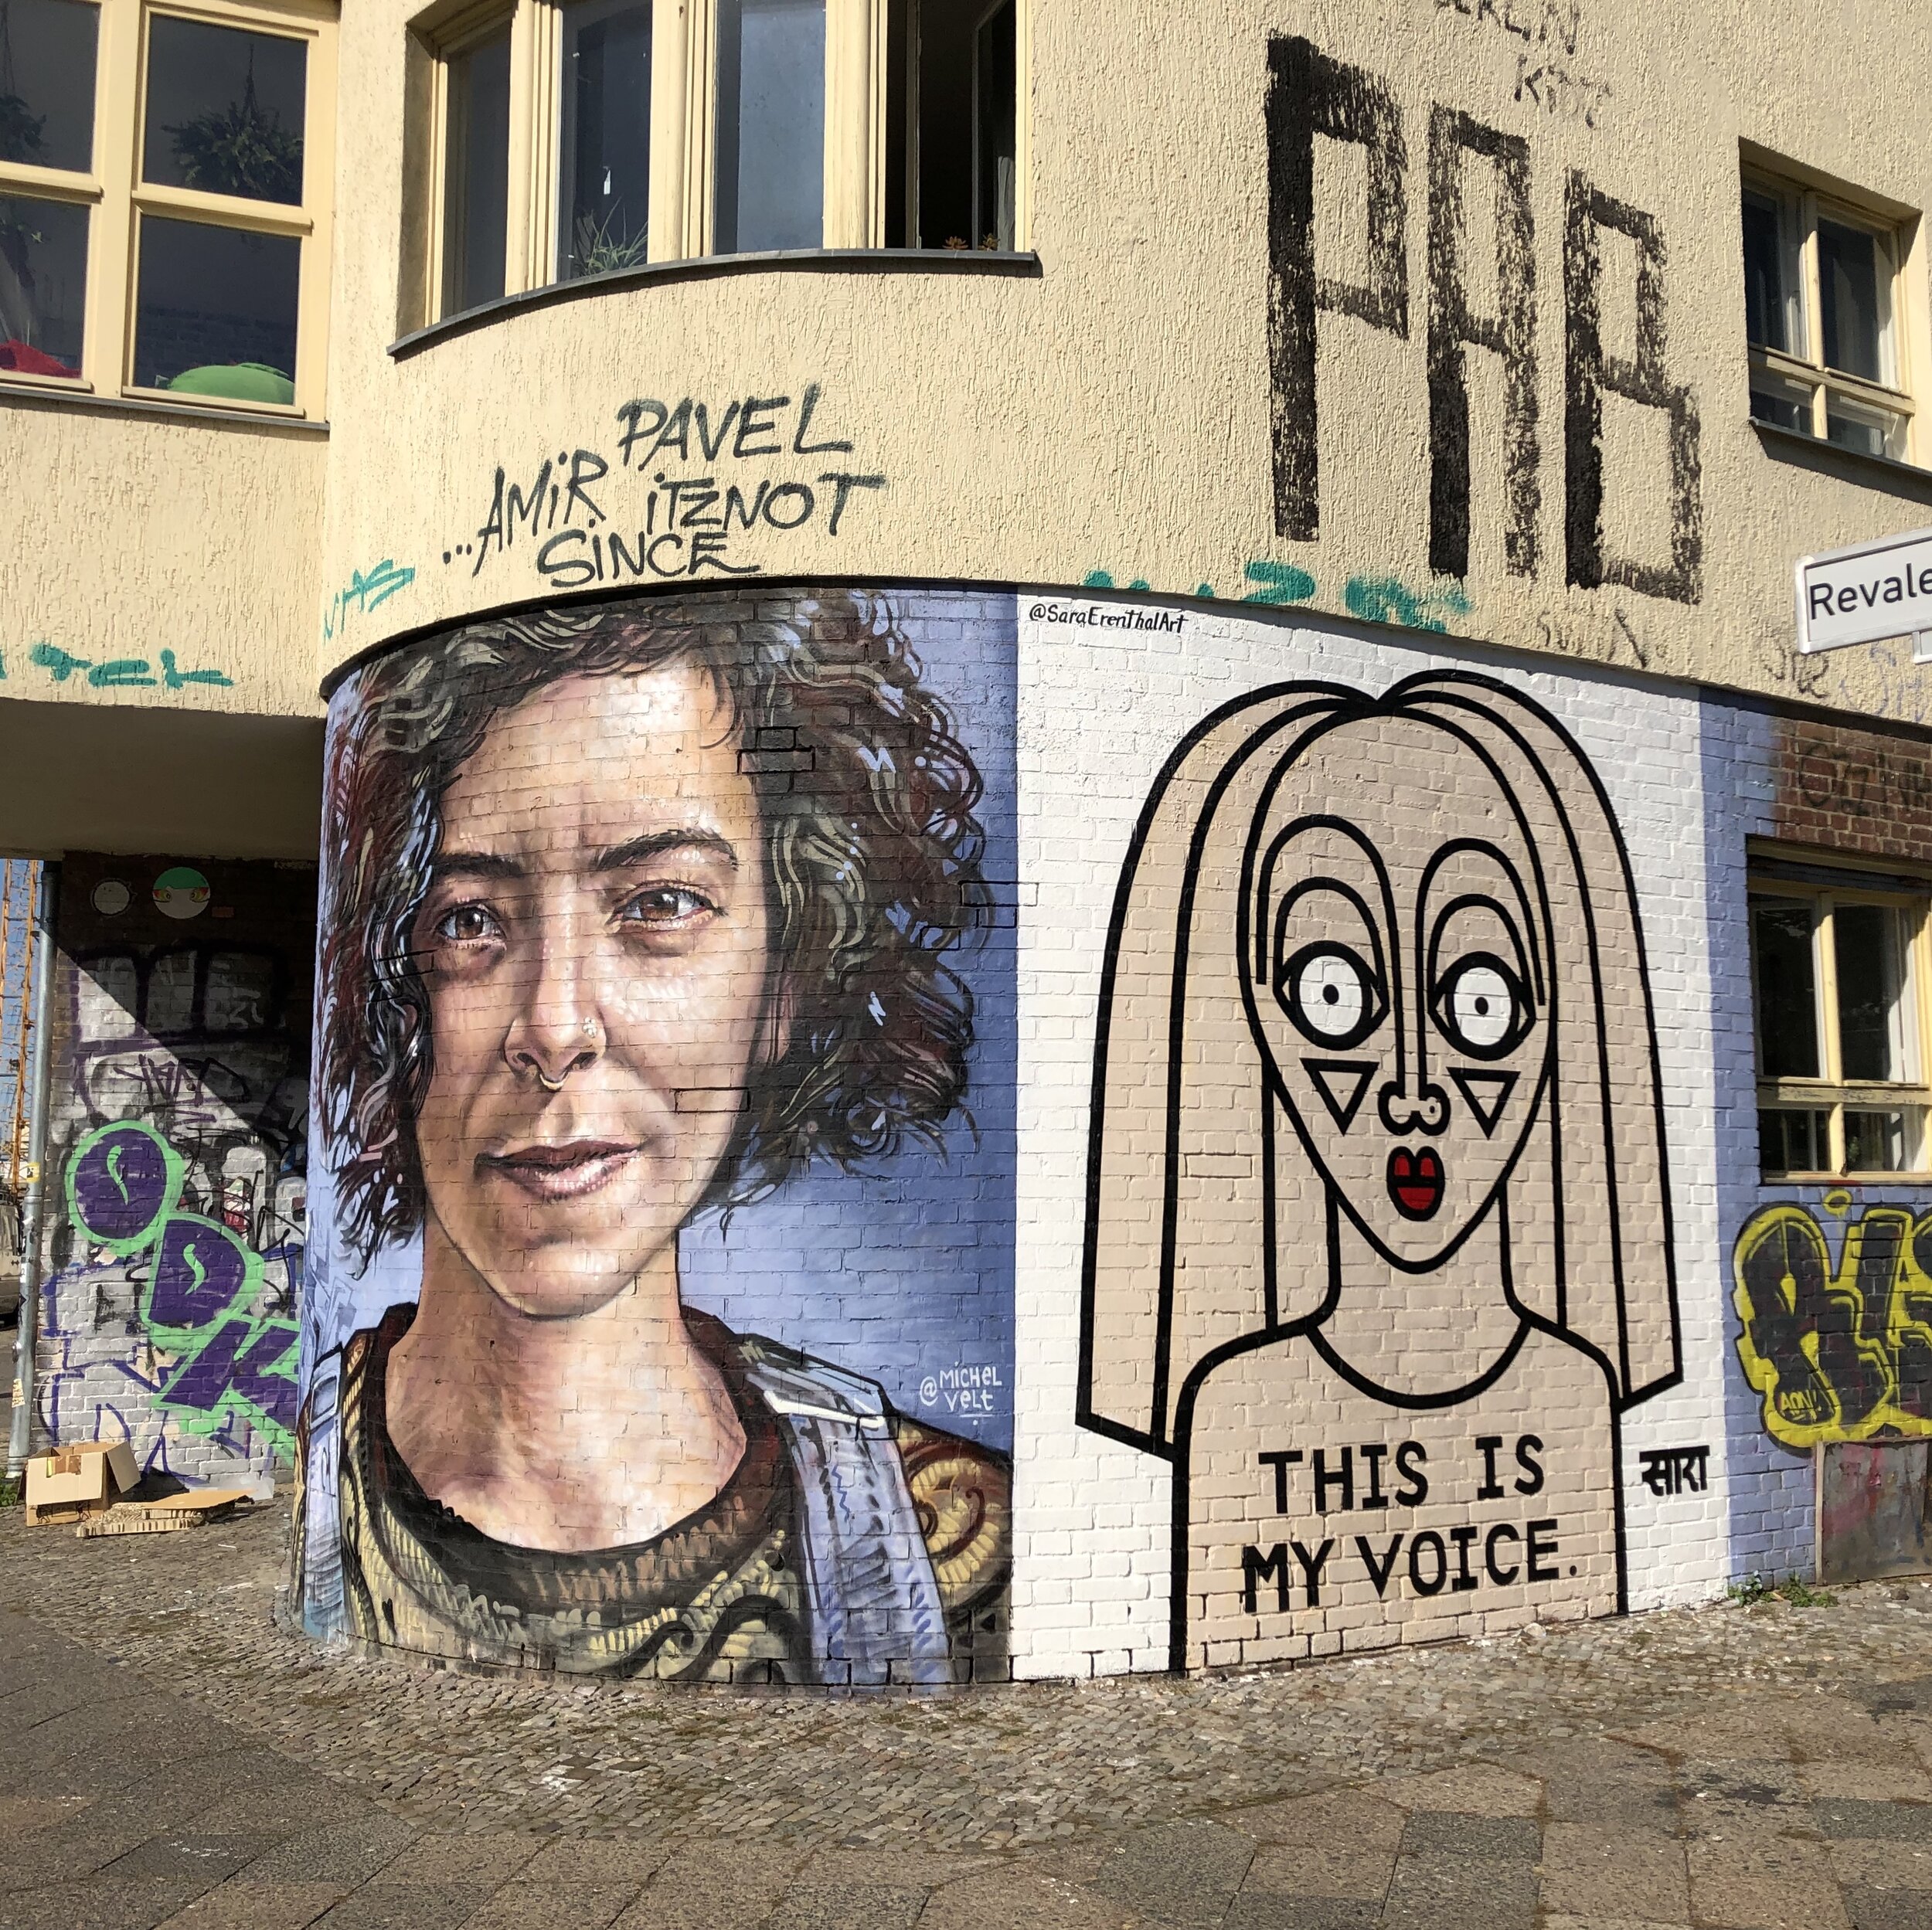  Mural in Berlin, Germany alongside a portrait of Sara Erenthal painted by Michel Velt.  2019 